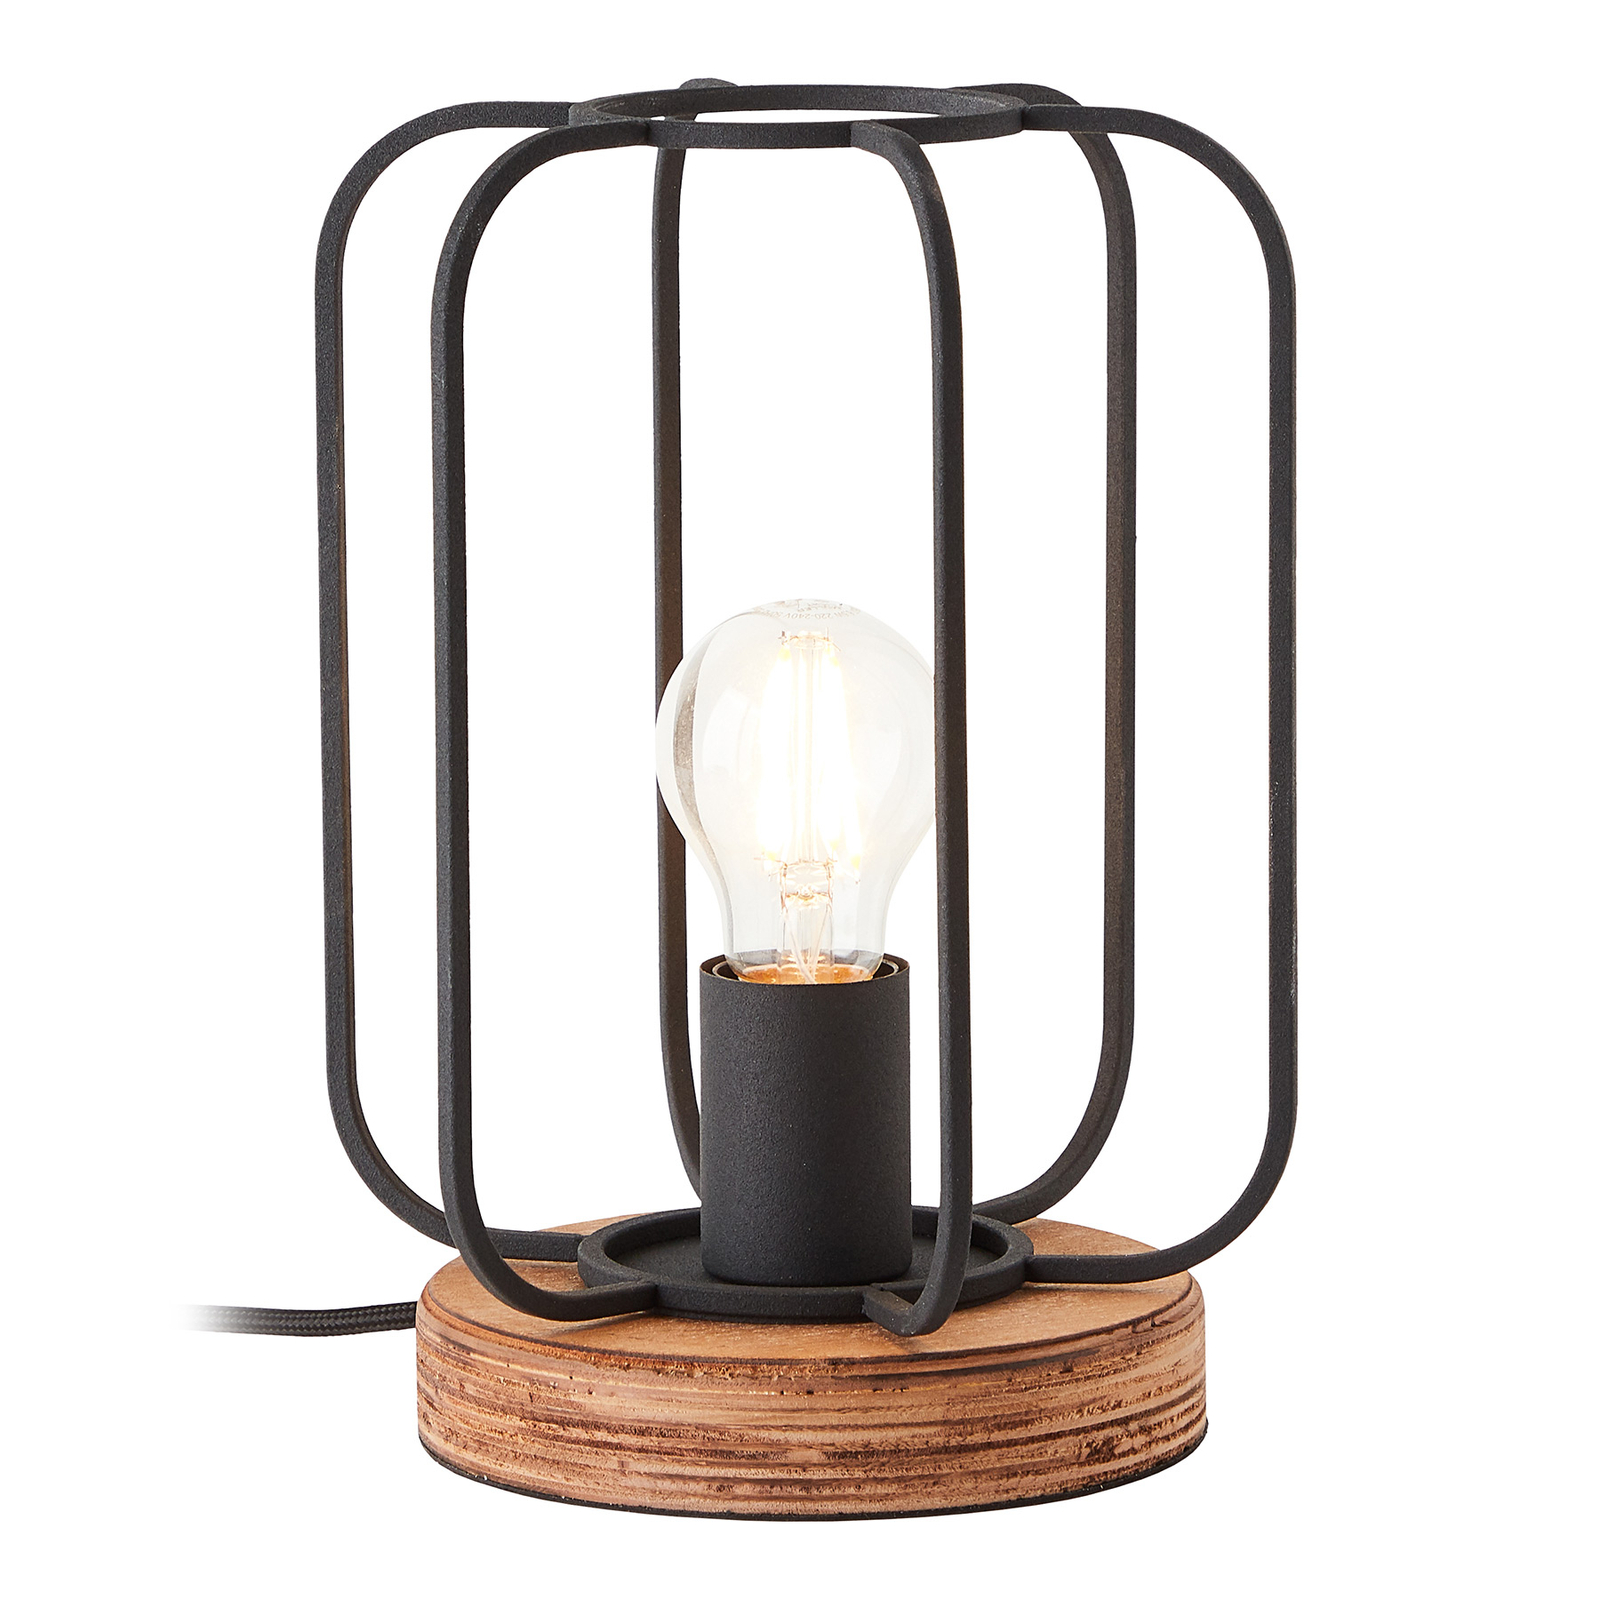 Tosh table lamp with a wooden base